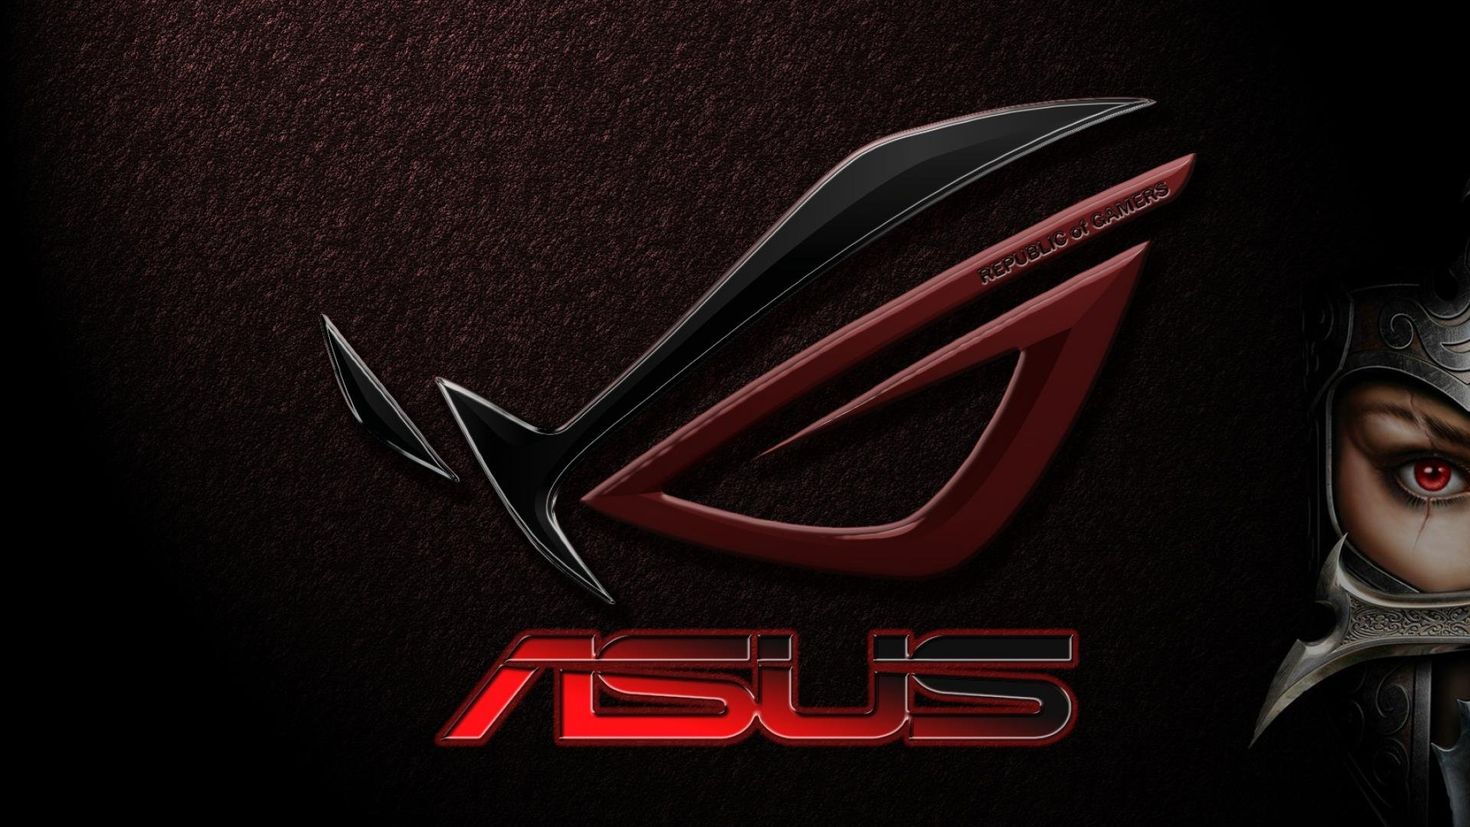 ASUS ROG themed